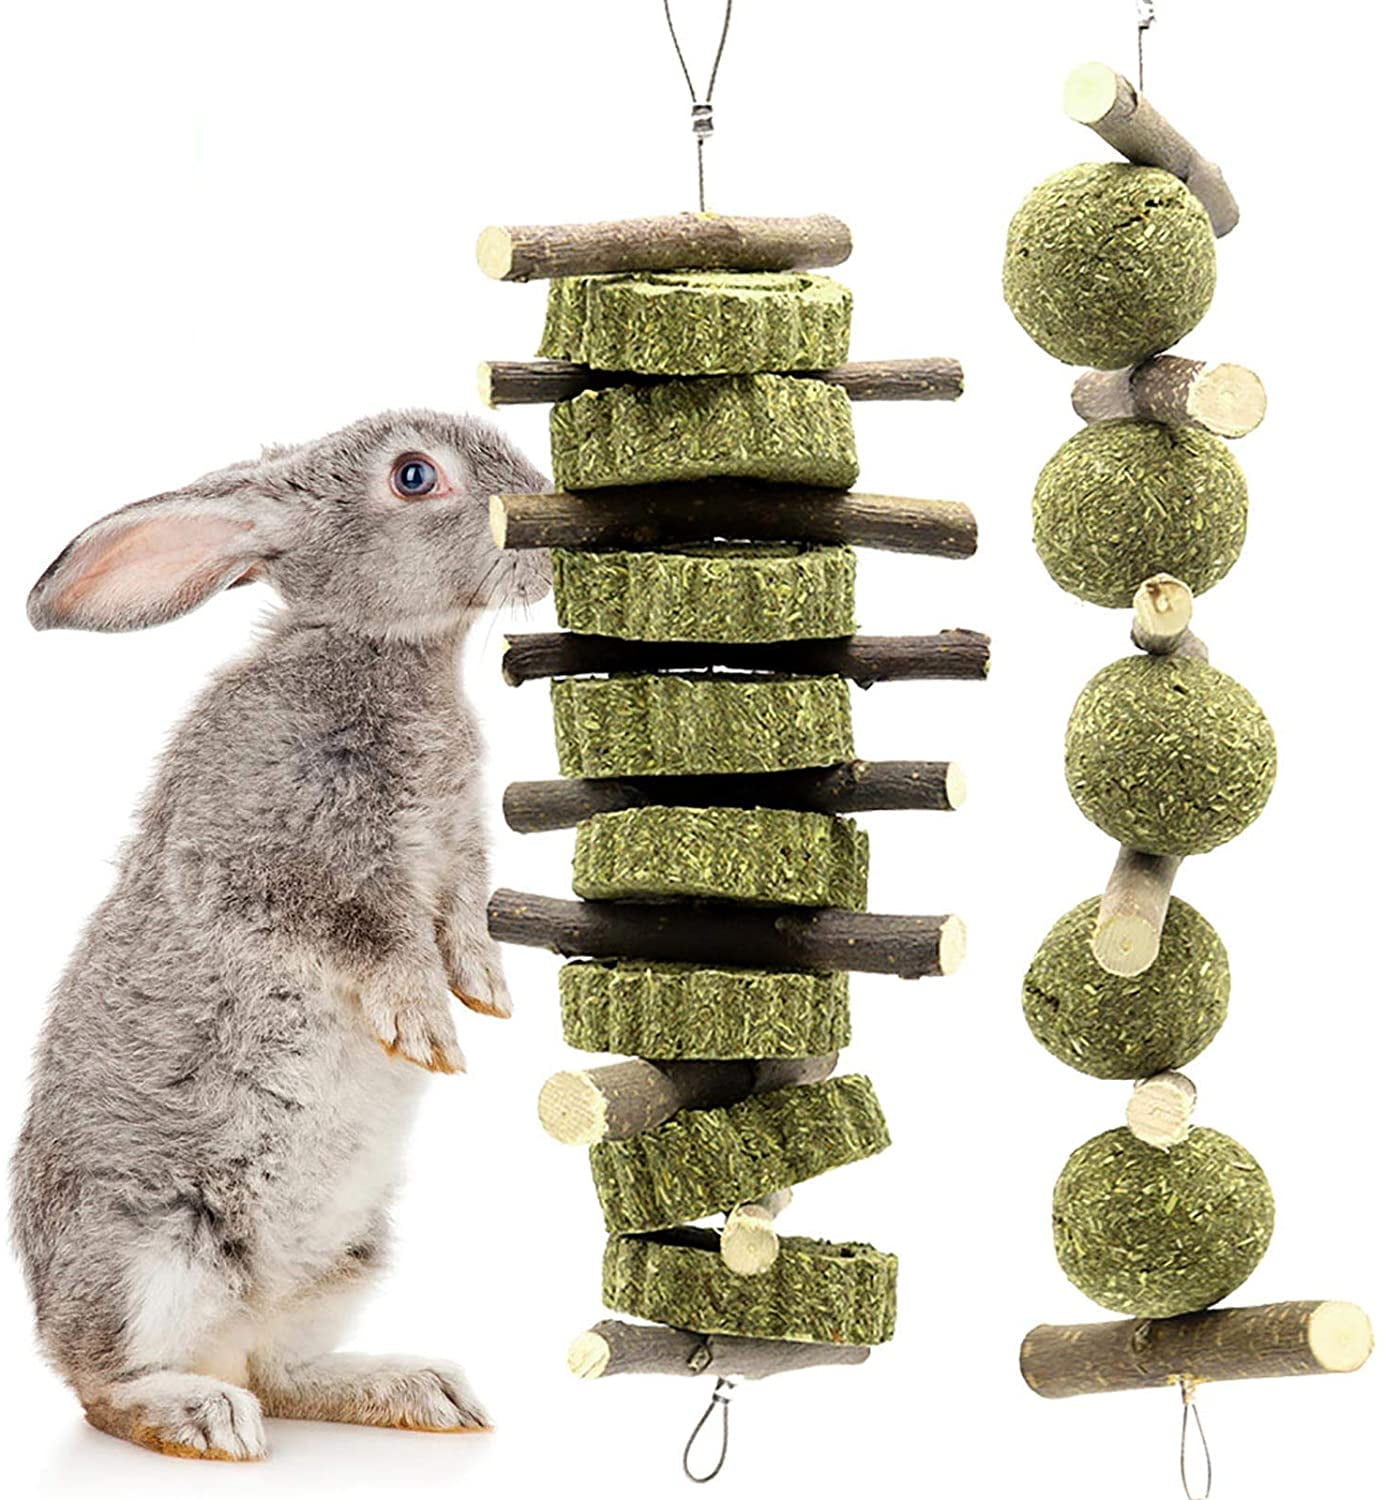 Rabbit Toys Hamster Biting Toy with Organic Apple Wood Branches/Timothy Hay Straw Cakes Pack-2 Small Animals Chew Toys Teeth Grinding for Bunny Chinchilla Guinea Pig Squirrel Parrot Gerbil 